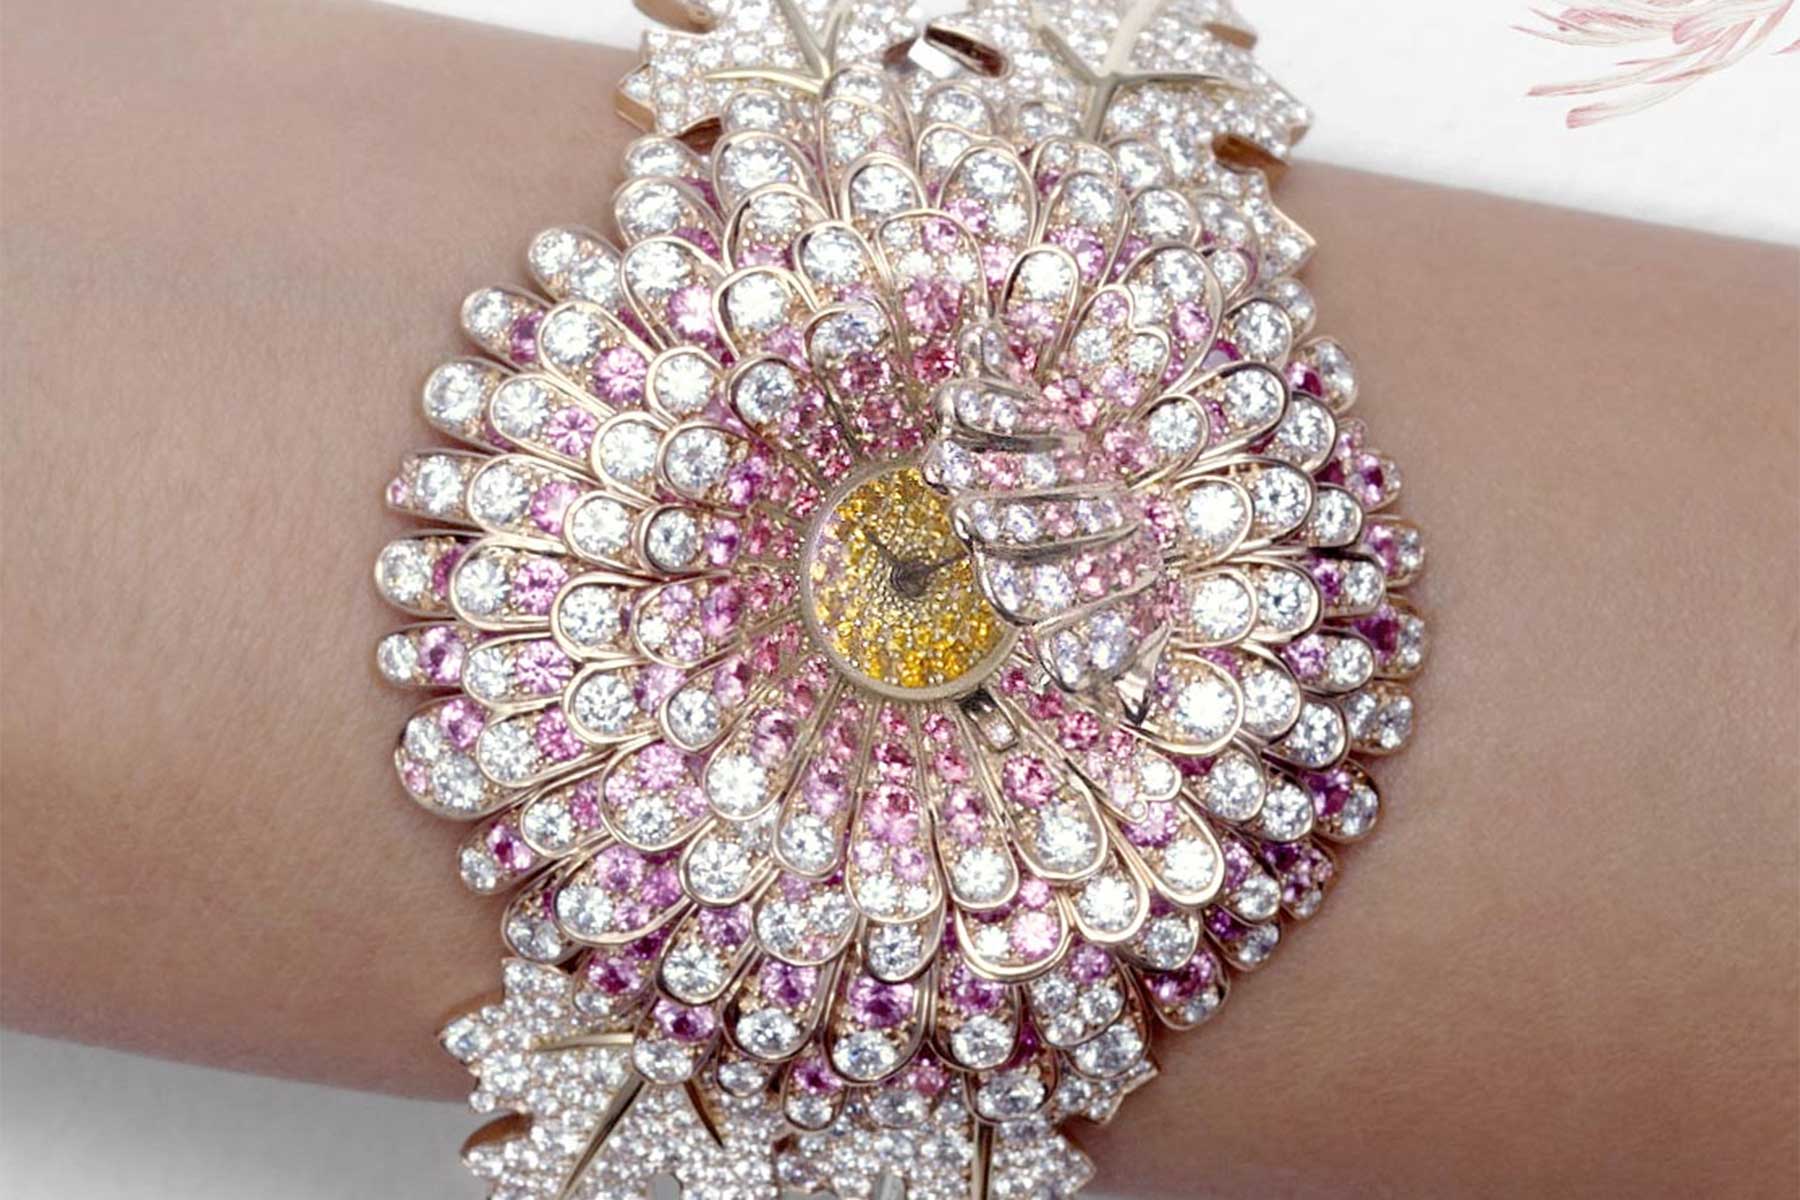 SIHH 2018: The most bedazzling women’s watches that caught our eye